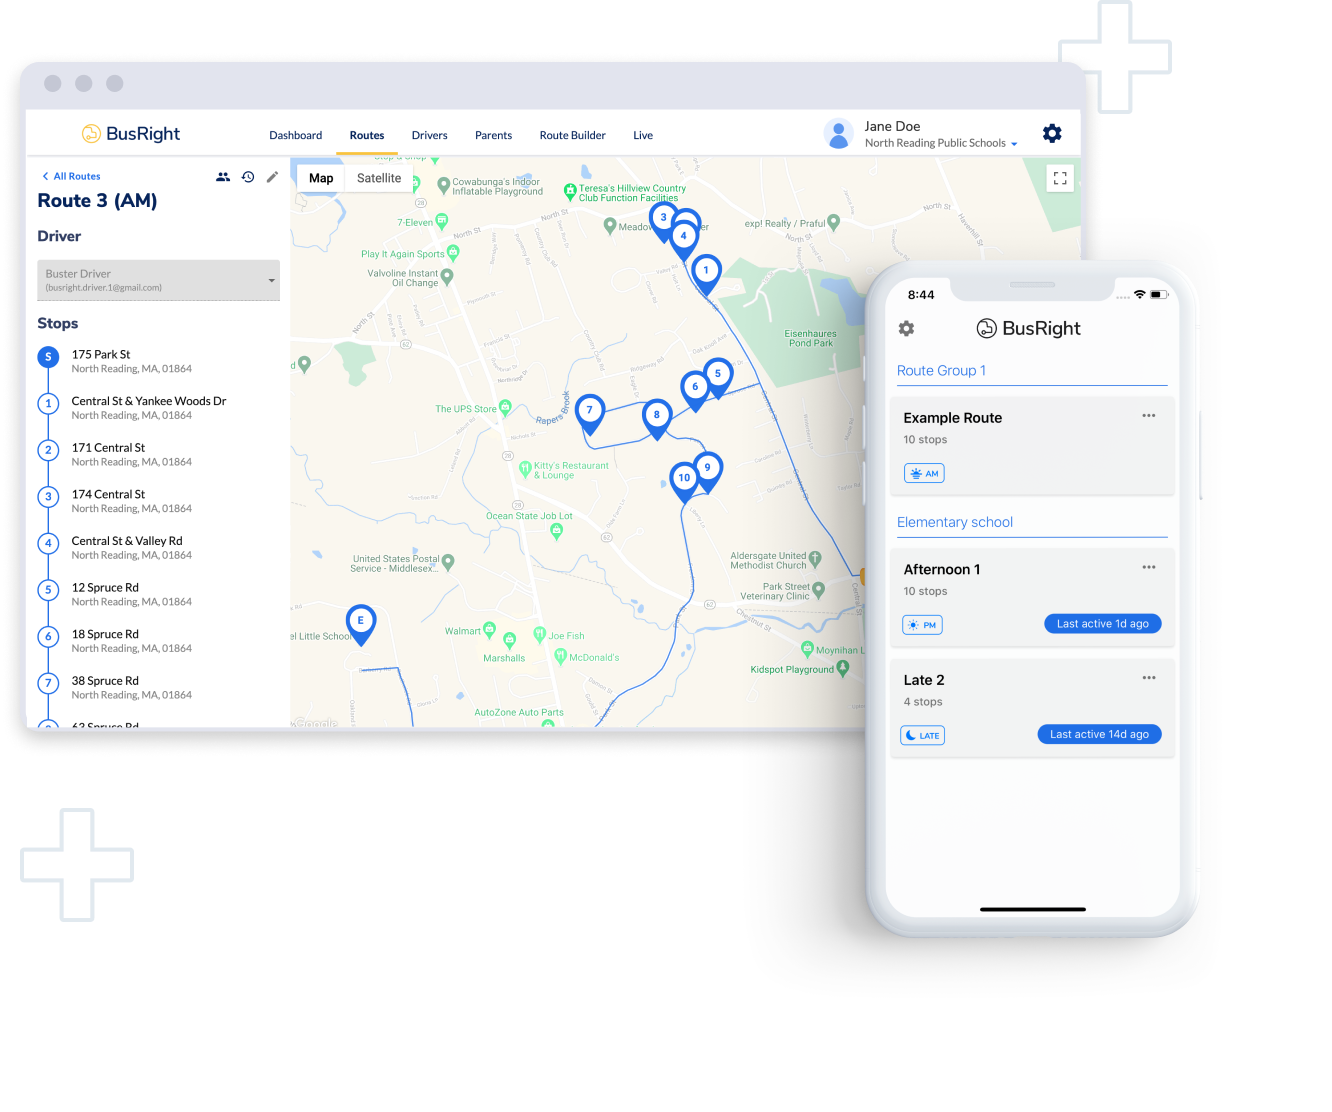 Screenshots of BusRight mobile app and web platform routes map.